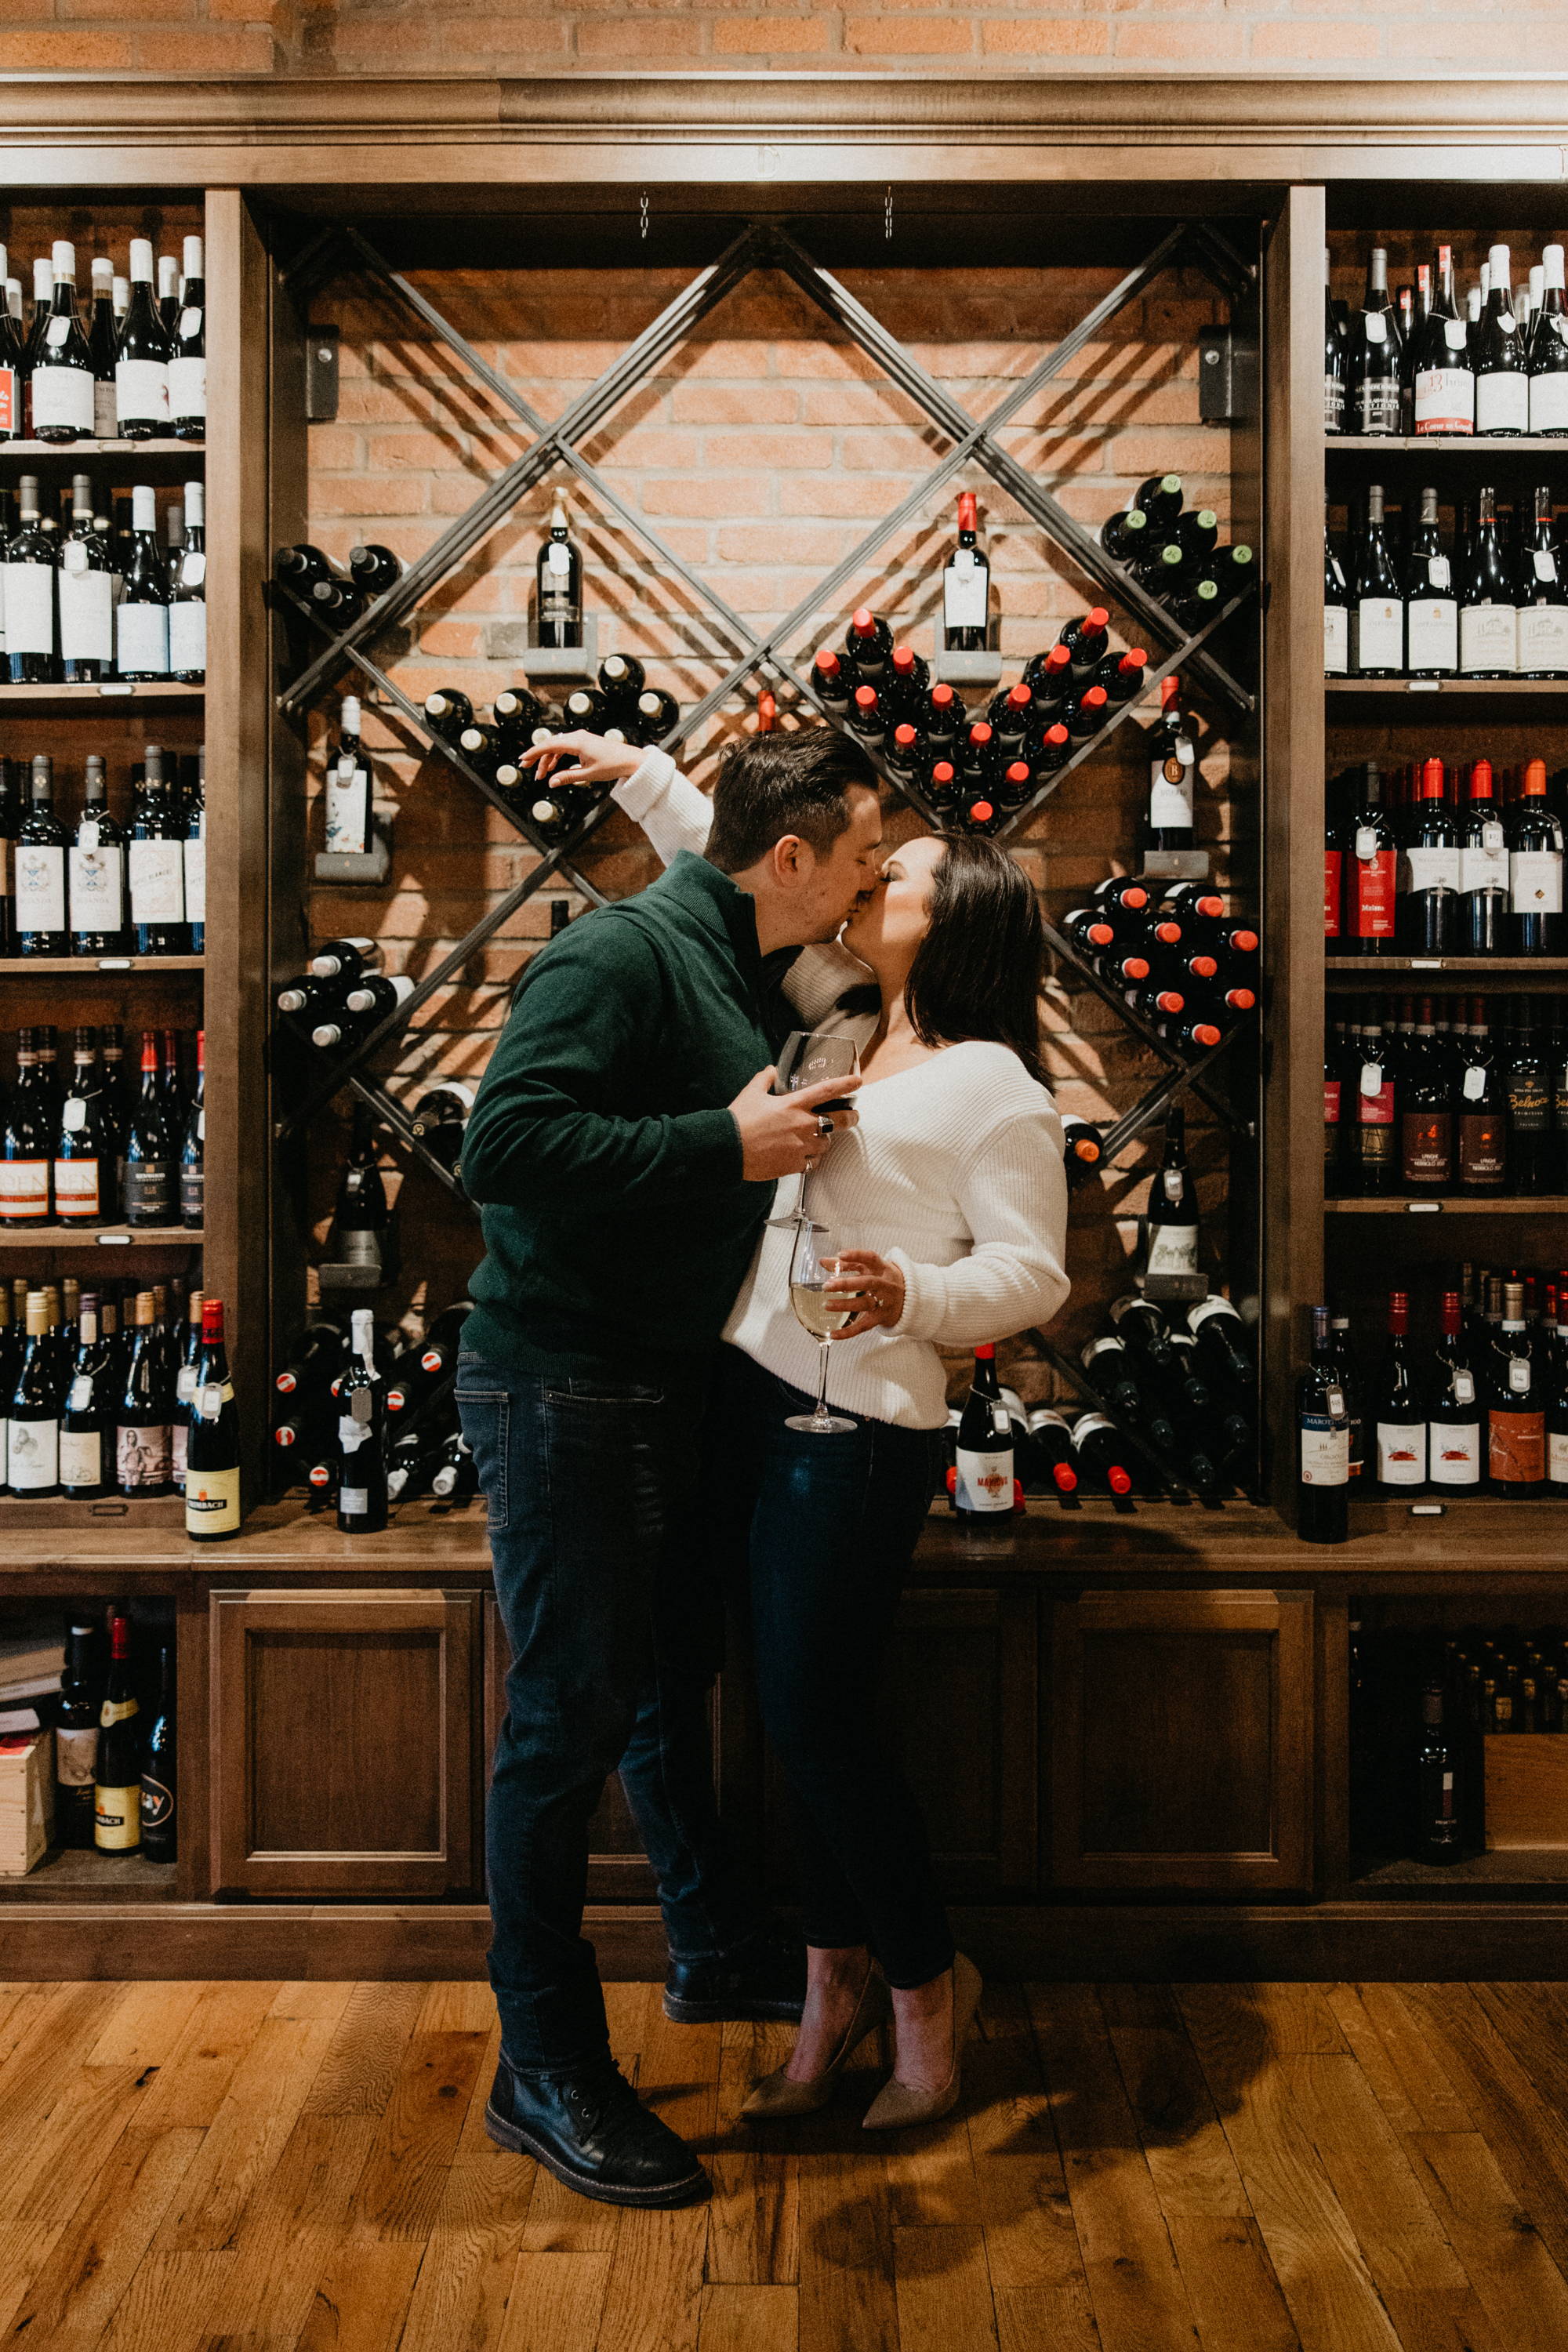 Kyle and Leigh kissing in front of wine bottles